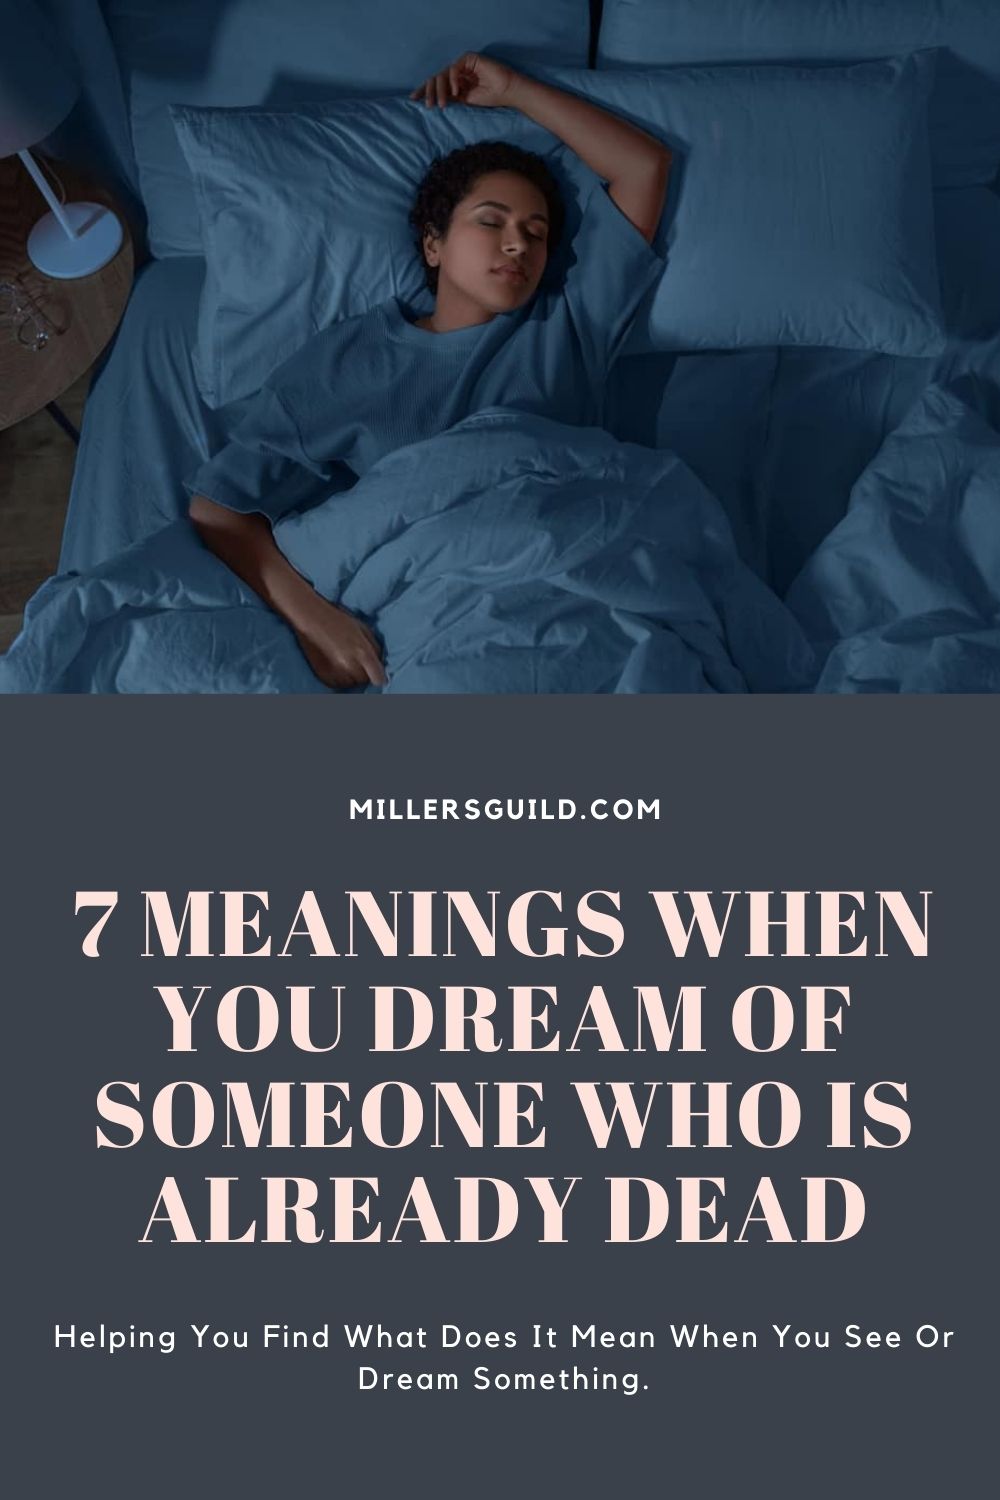 7 Meanings When You Dream of Someone Who Is Already Dead